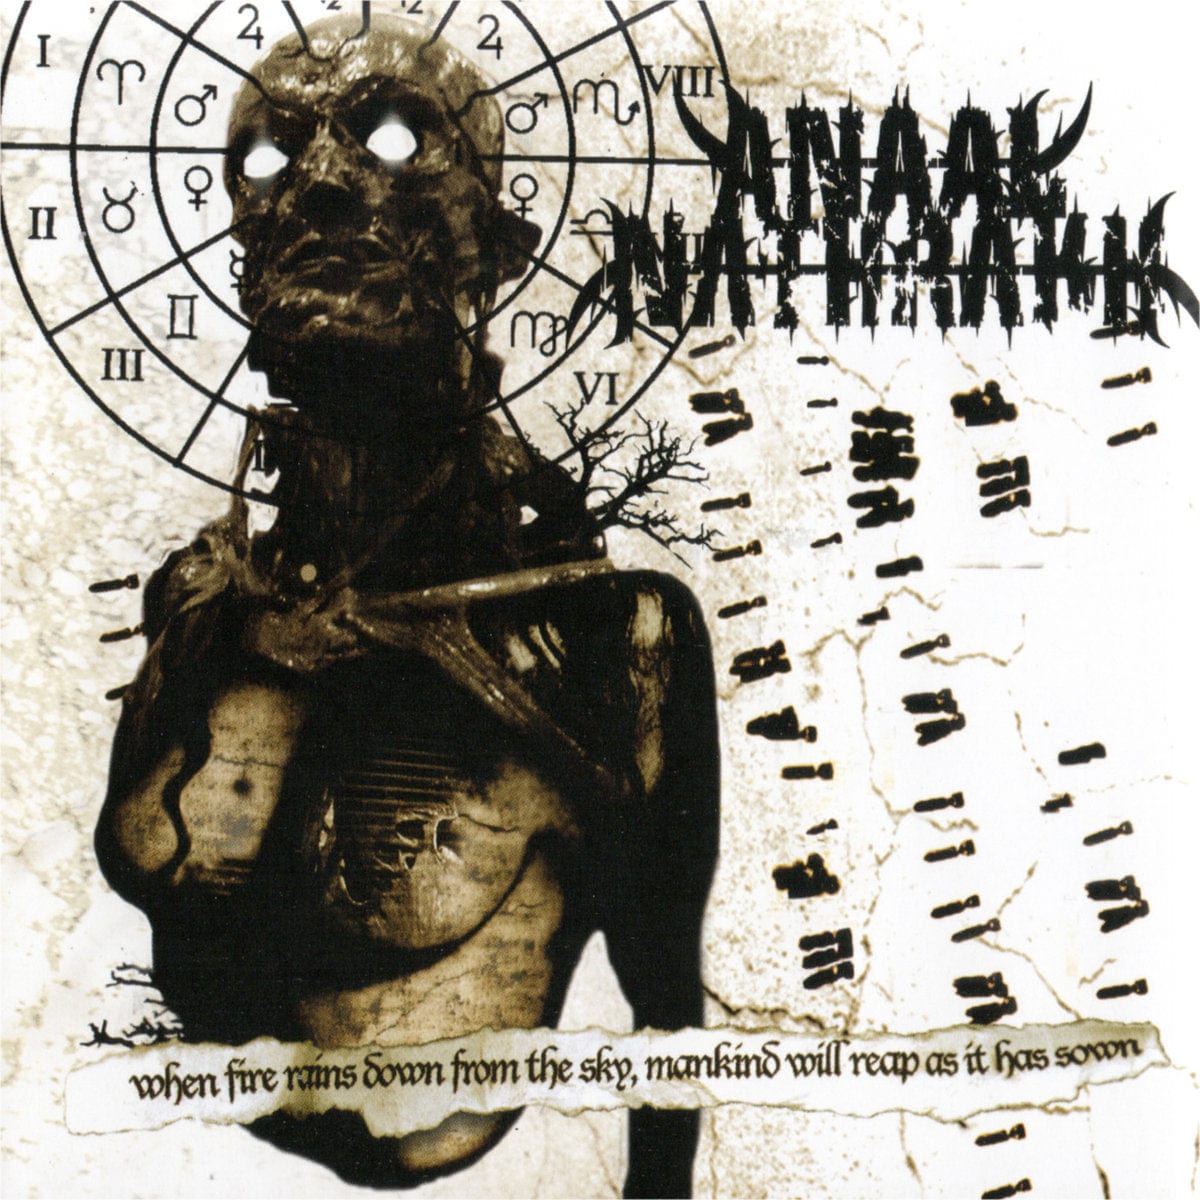 Anaal Nathrakh - When Fire Rains Down from the Sky, Mankind Will Reap as It Is Seen - Gray Vinyl